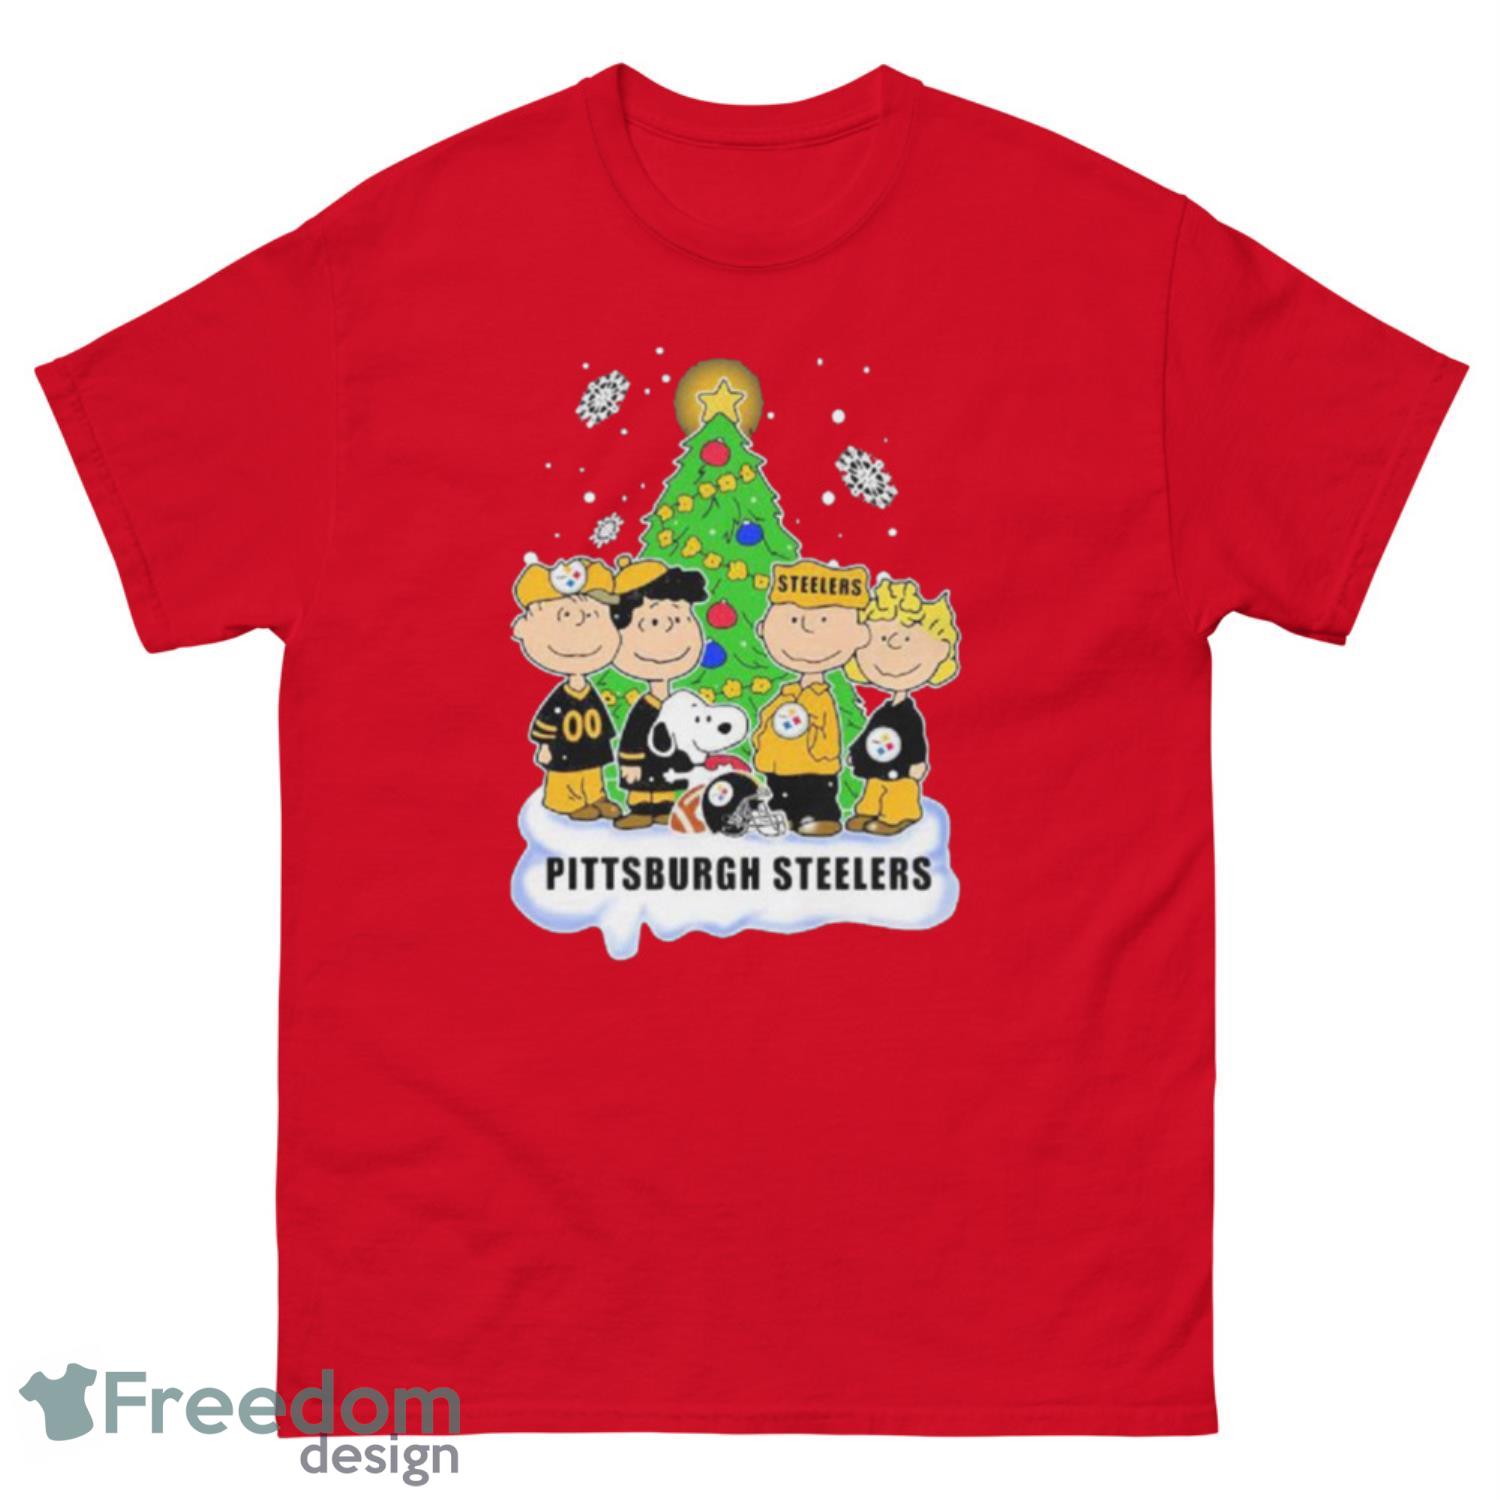 Pittsburgh Steelers NFL Football Snoopy With Friends Christmastree Xmas Shirt